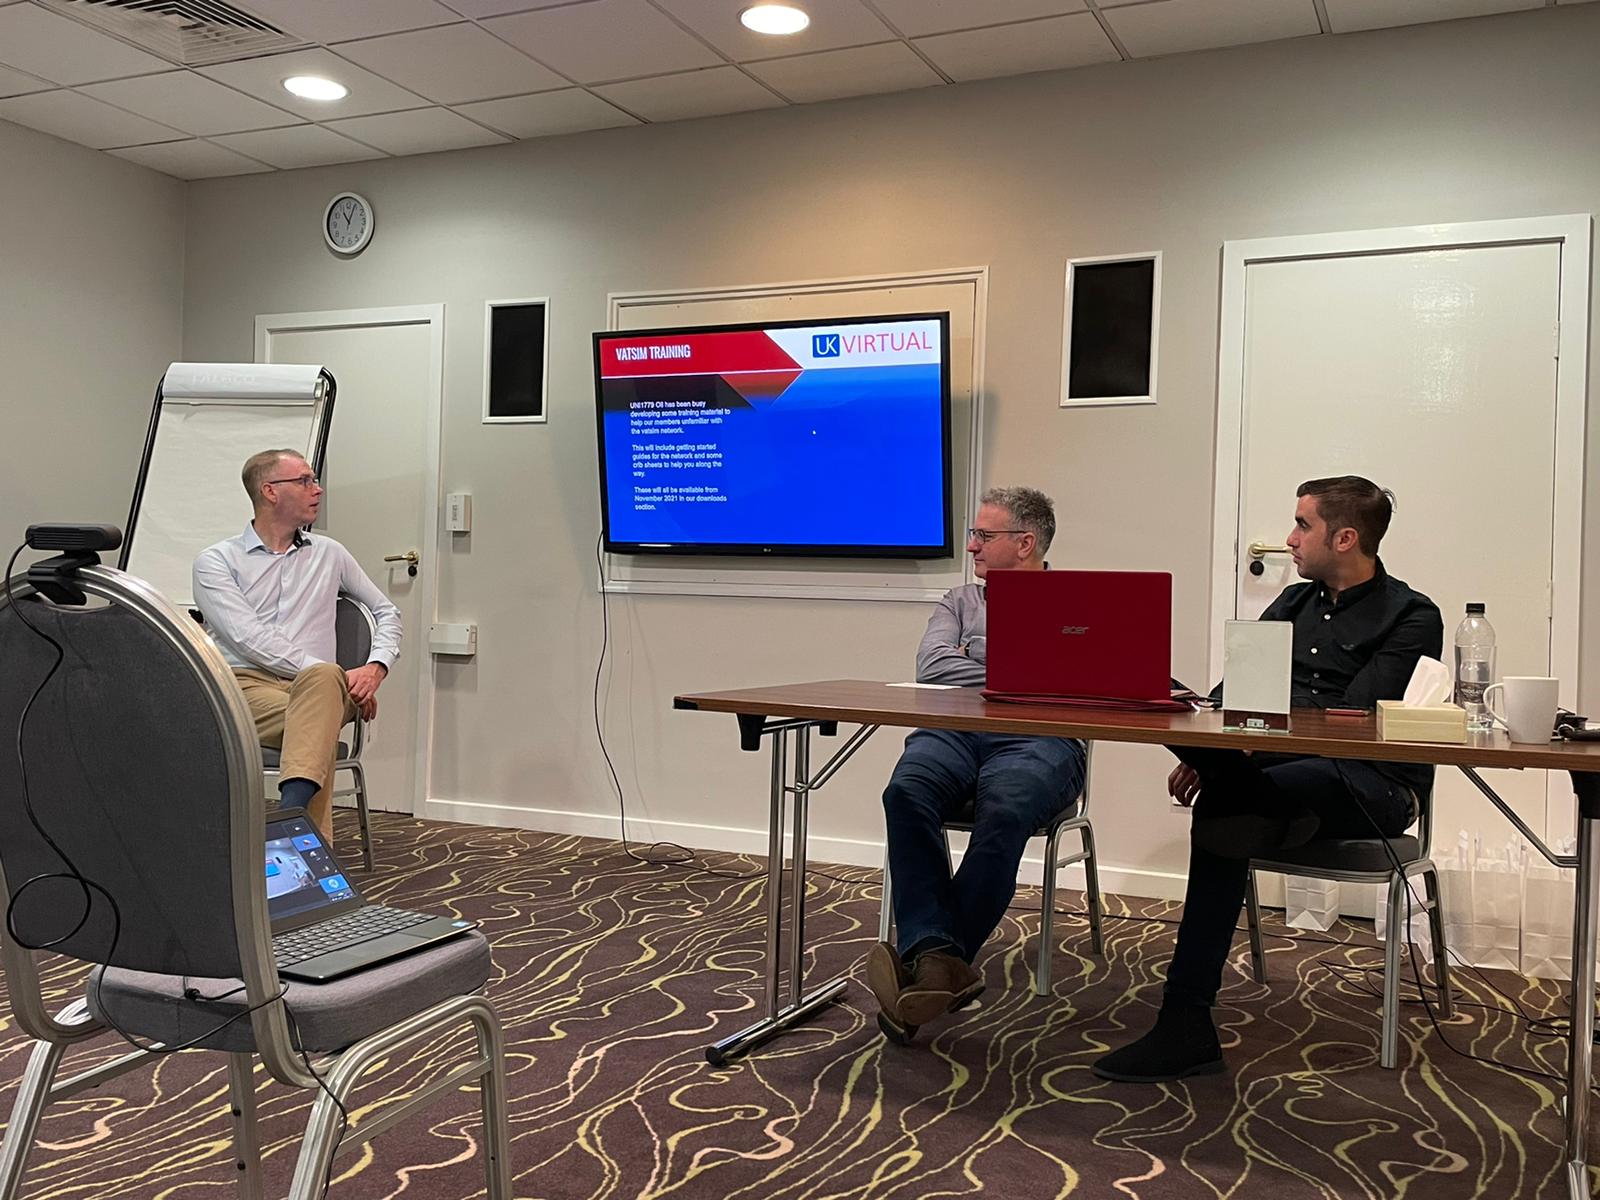 UK virtual Meet Up 2021 – What you missed!